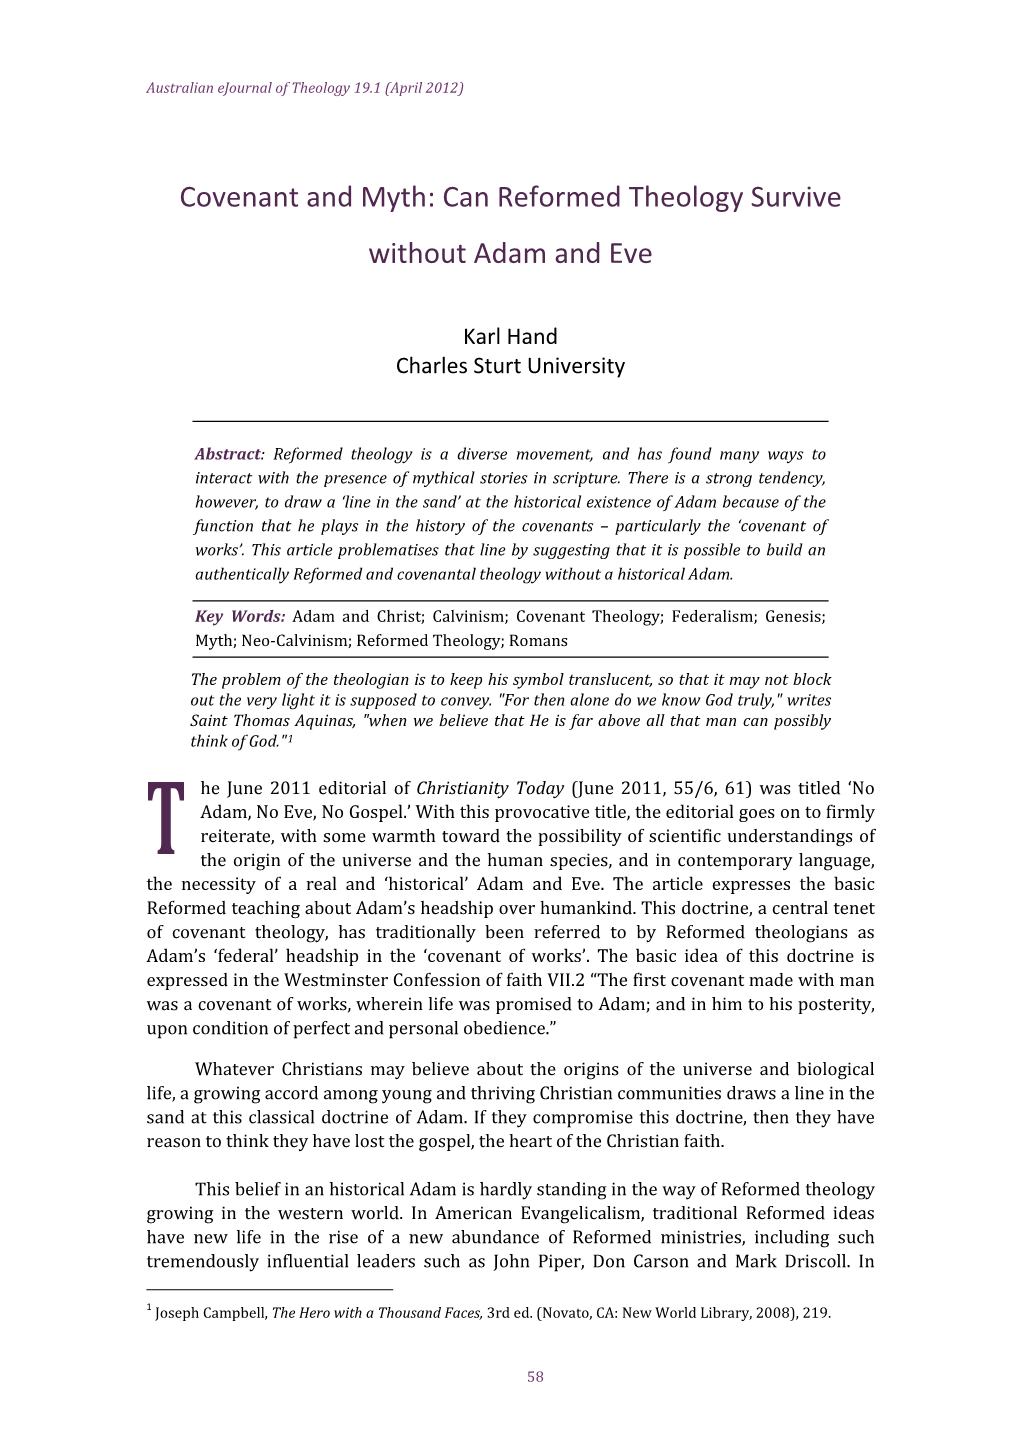 Covenant and Myth: Can Reformed Theology Survive Without Adam and Eve